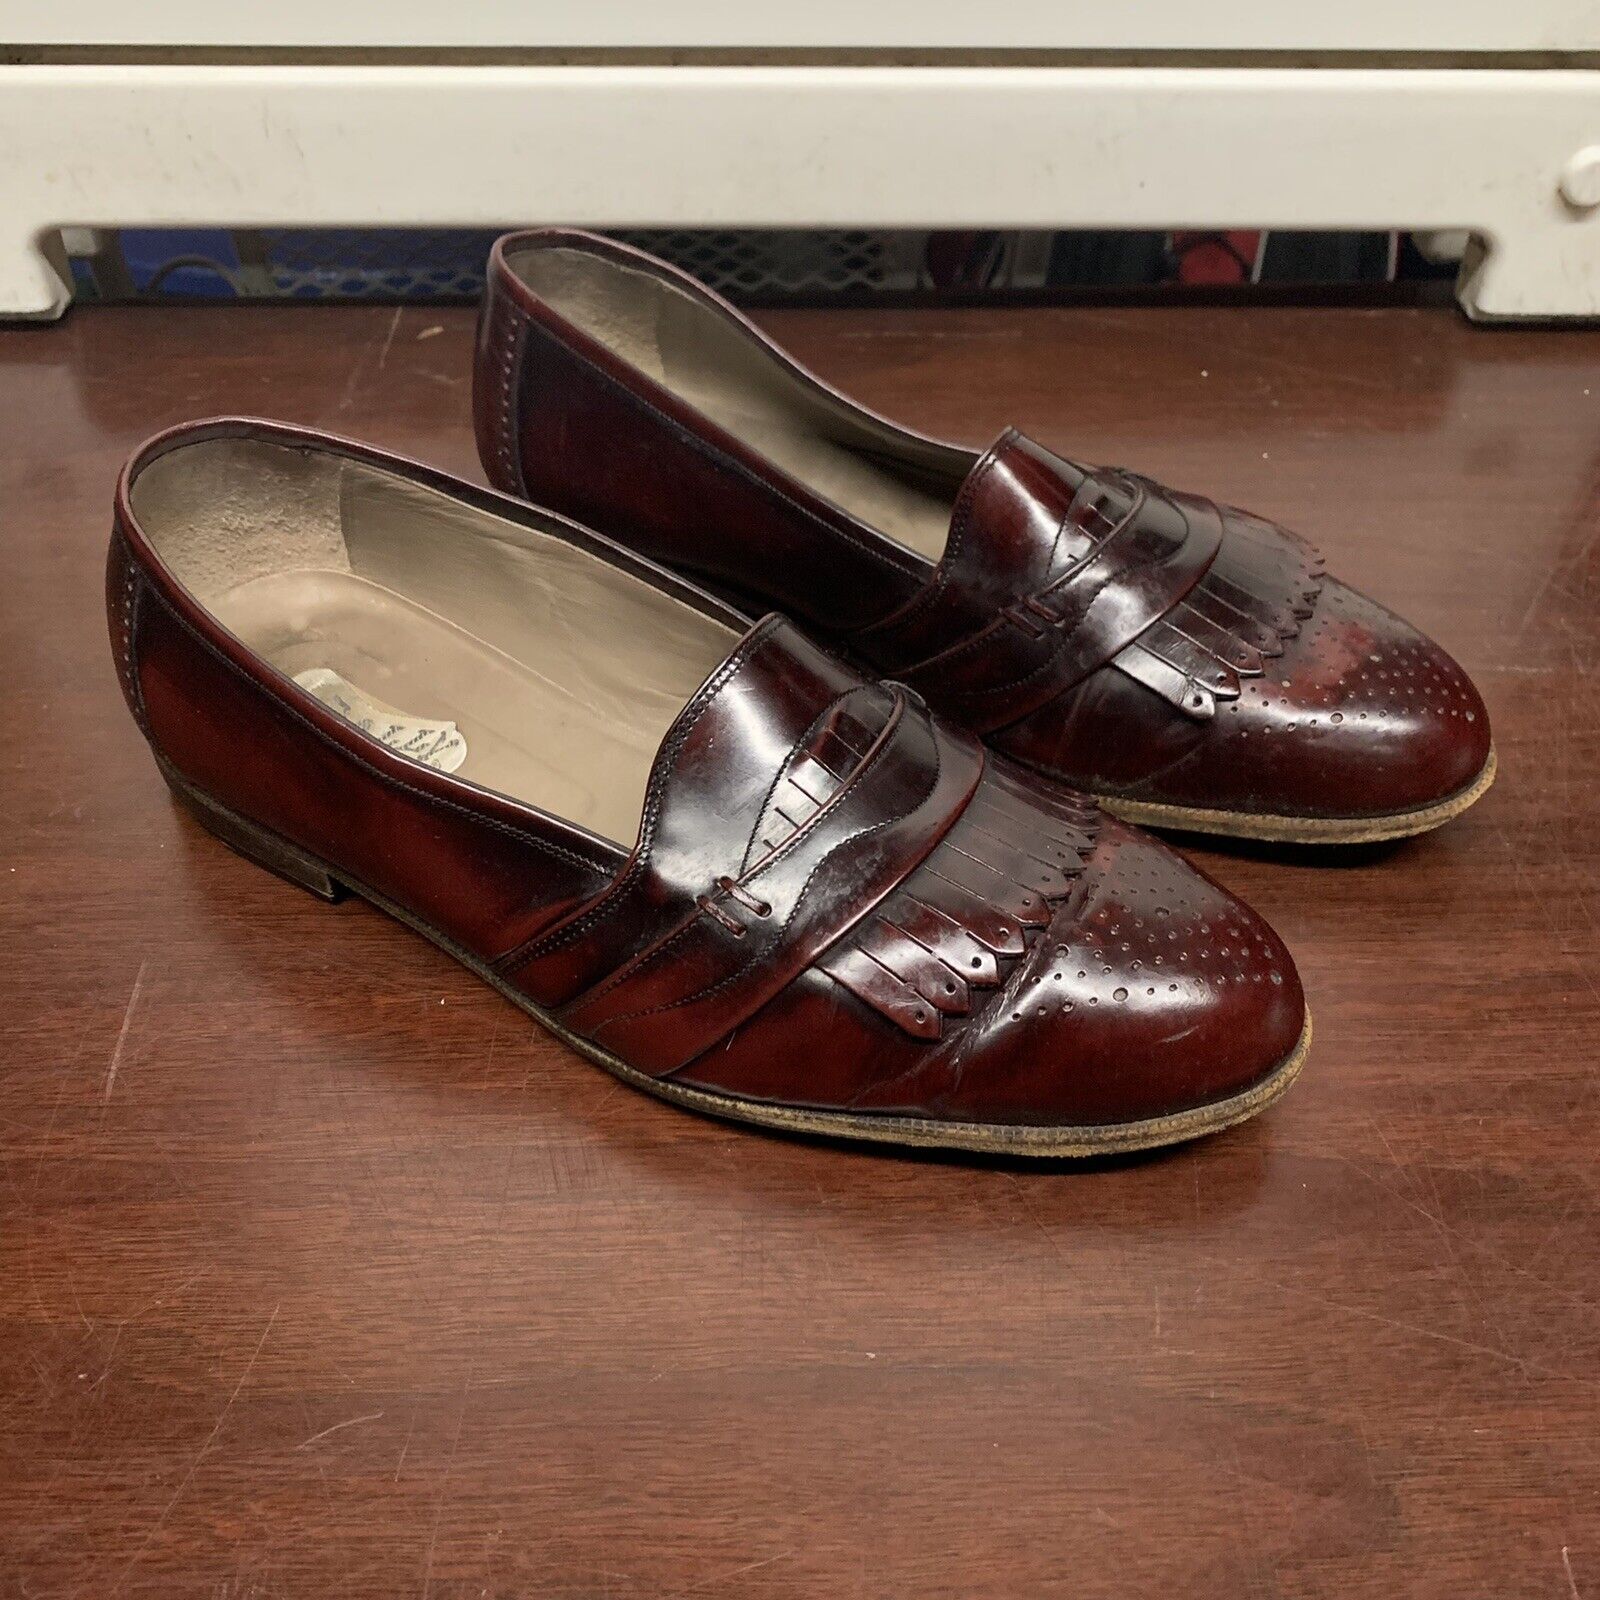 Vintage Bally Loafers Made in Italy Size 13EEE, Leather